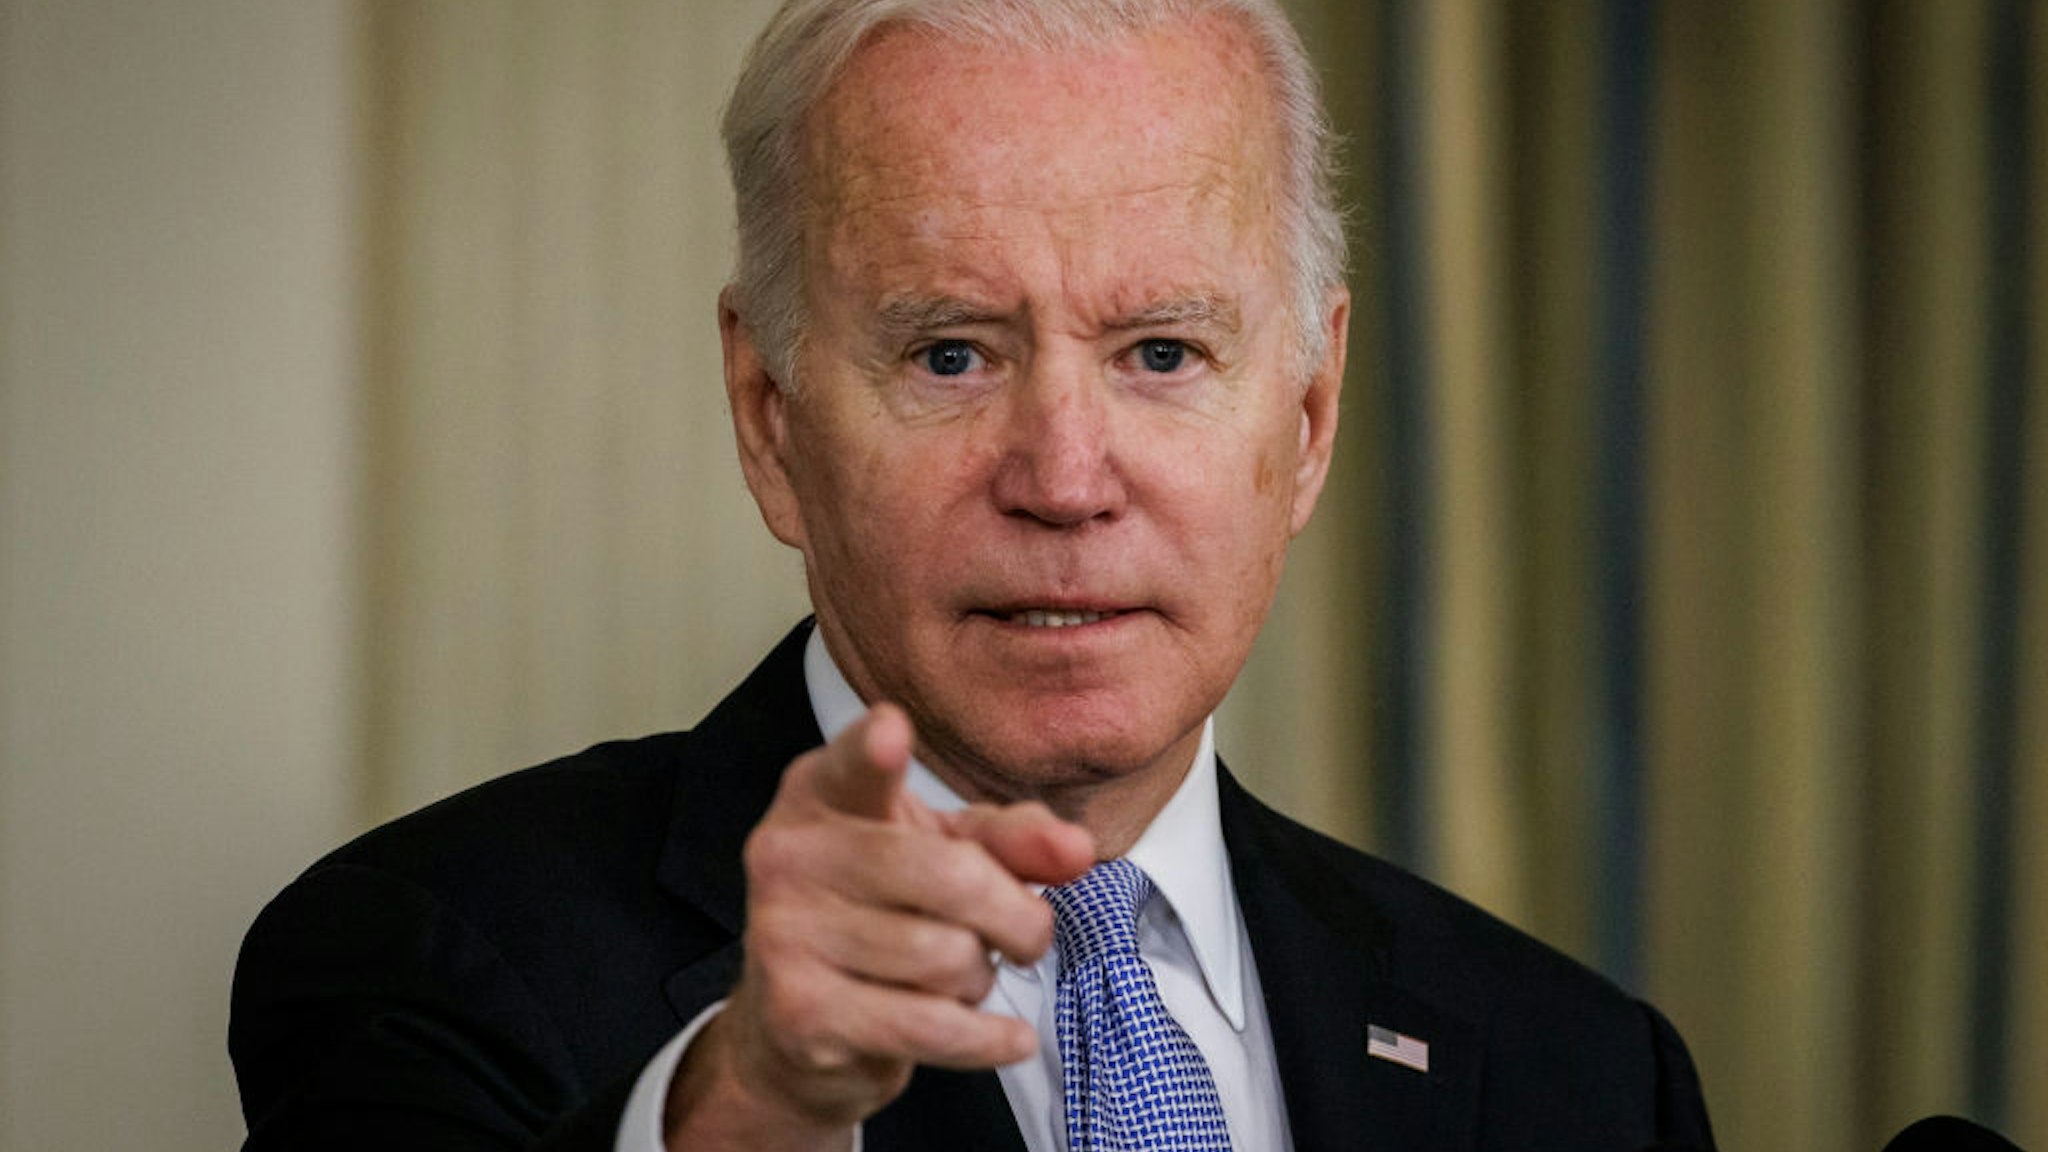 U.S. President Joe Biden speaks during a press conference in the State Dinning Room at the White House on November 6, 2021 in Washington, DC.